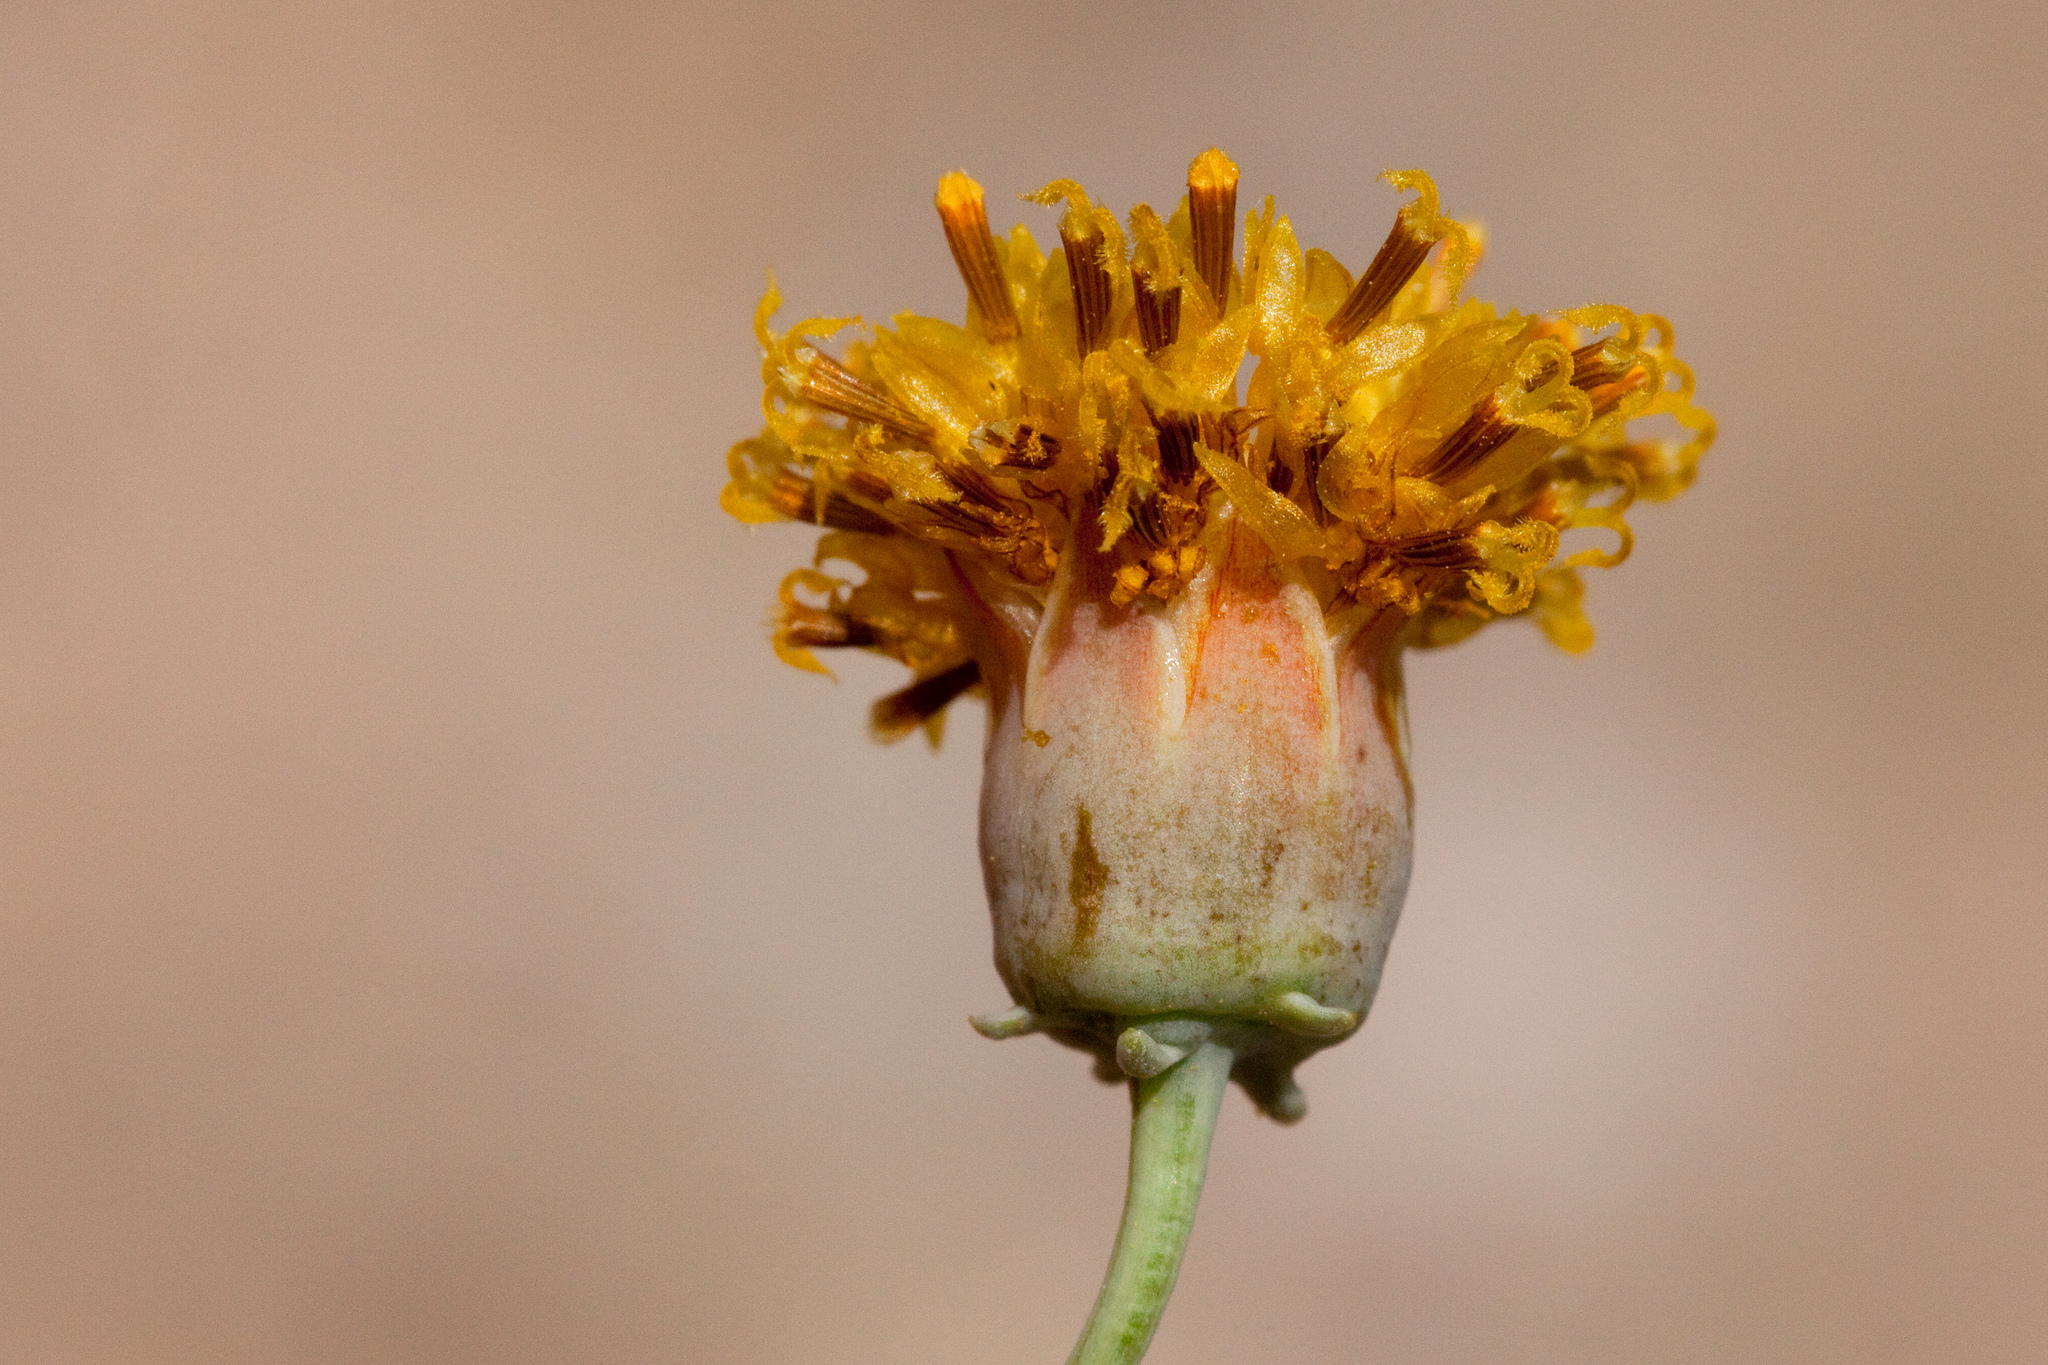 A flower in bloom with a bulbous base and protruding yellow ray flowers